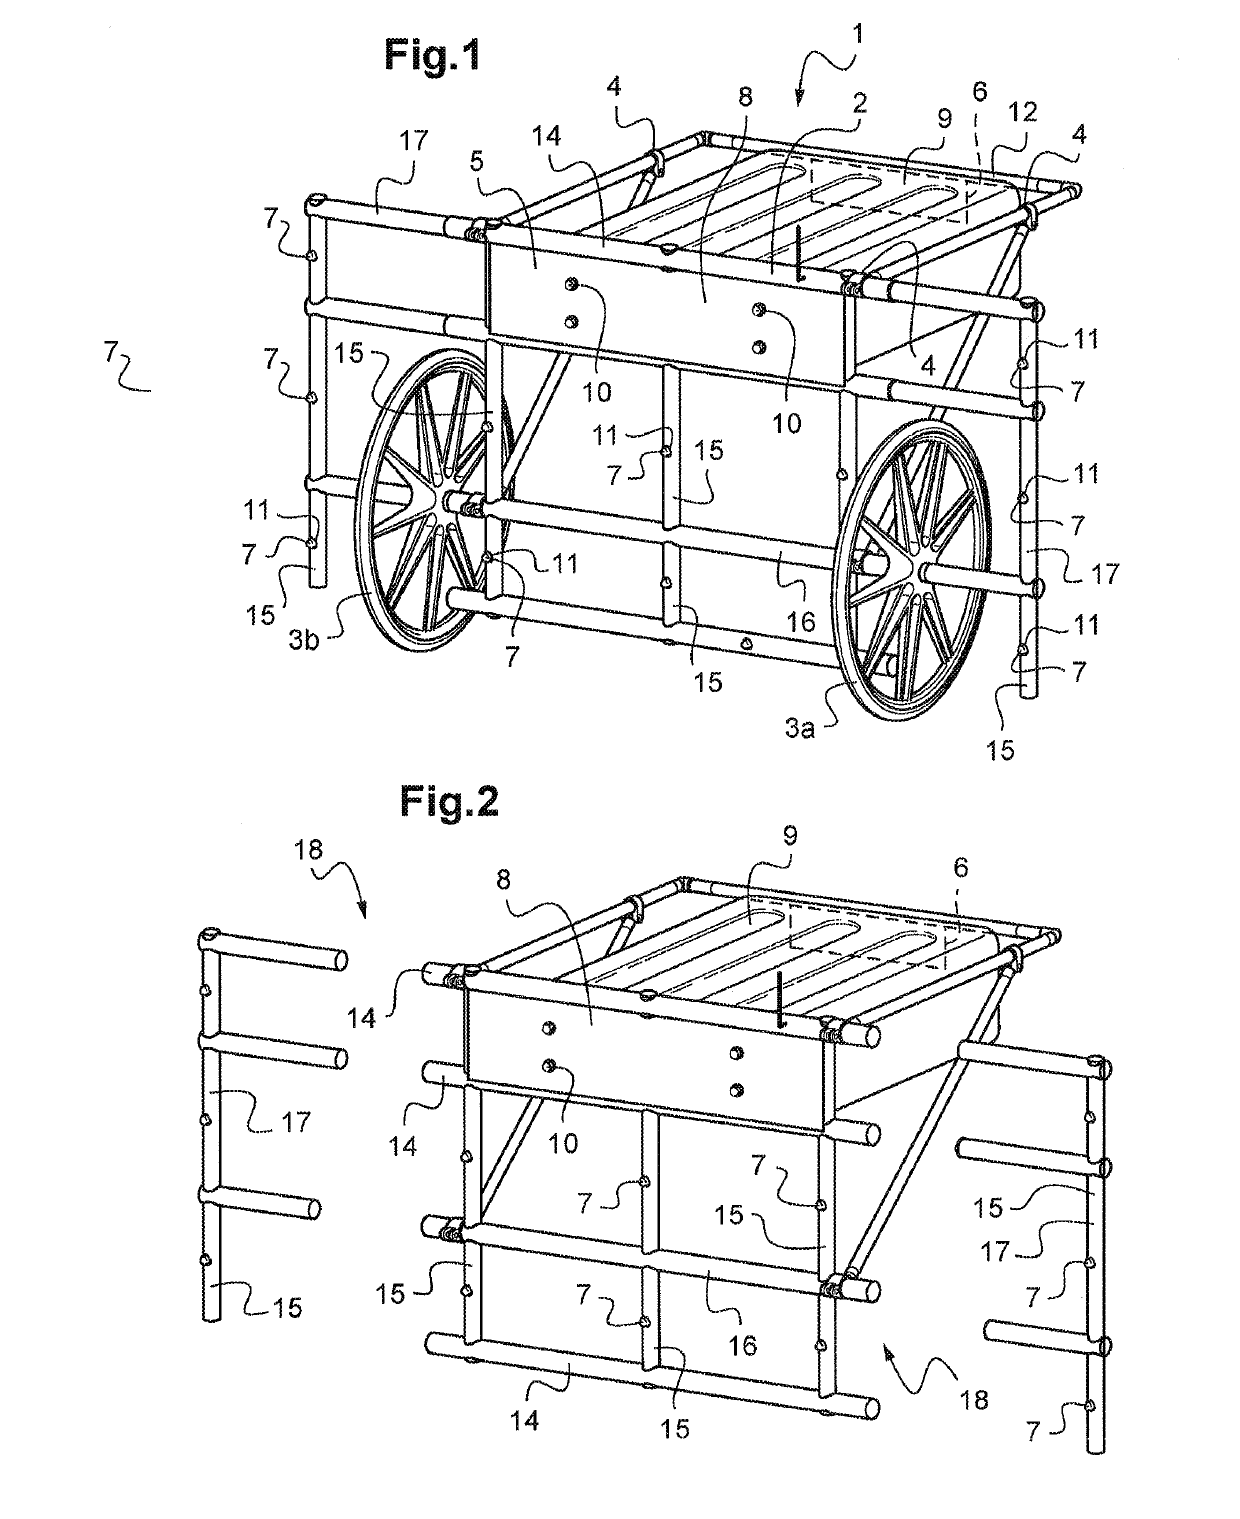 Modular carriage for recording magnetic terrain data in particular for the non-invasive inspection of pipelines or the same